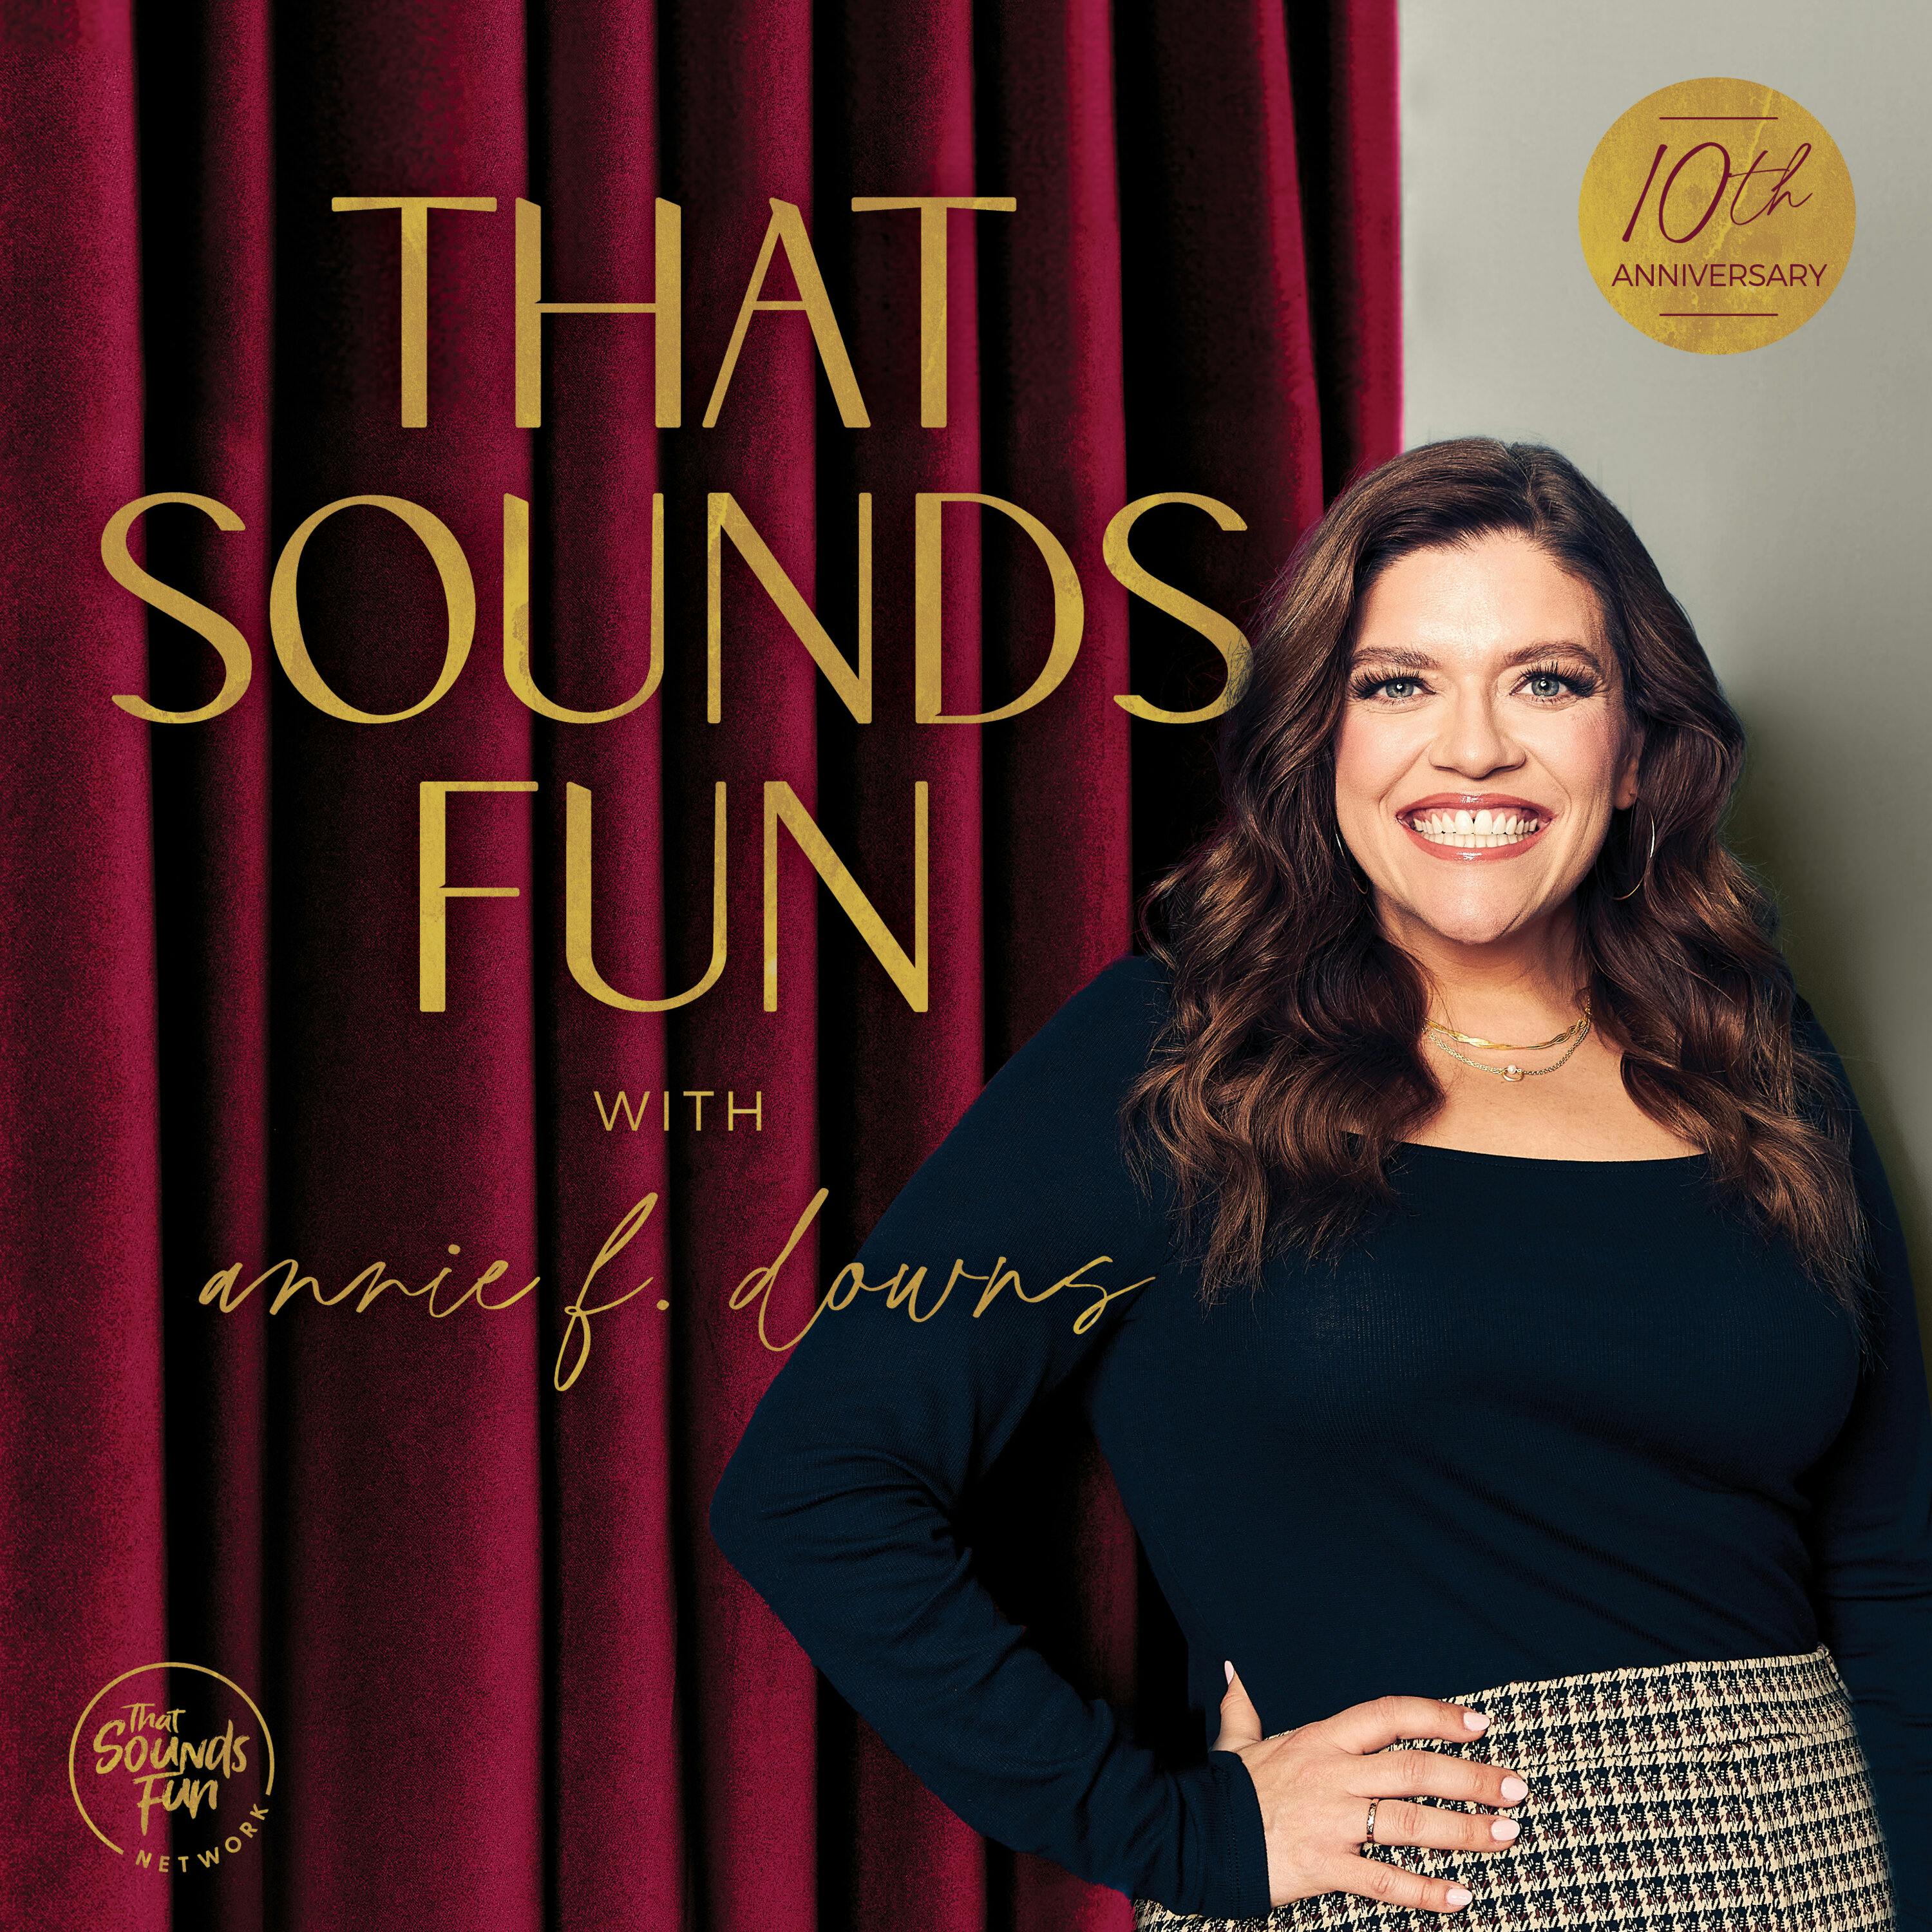 Live in Love Podcast with Lauren Akins is BACK for Season 3 on the That Sounds Fun Network!